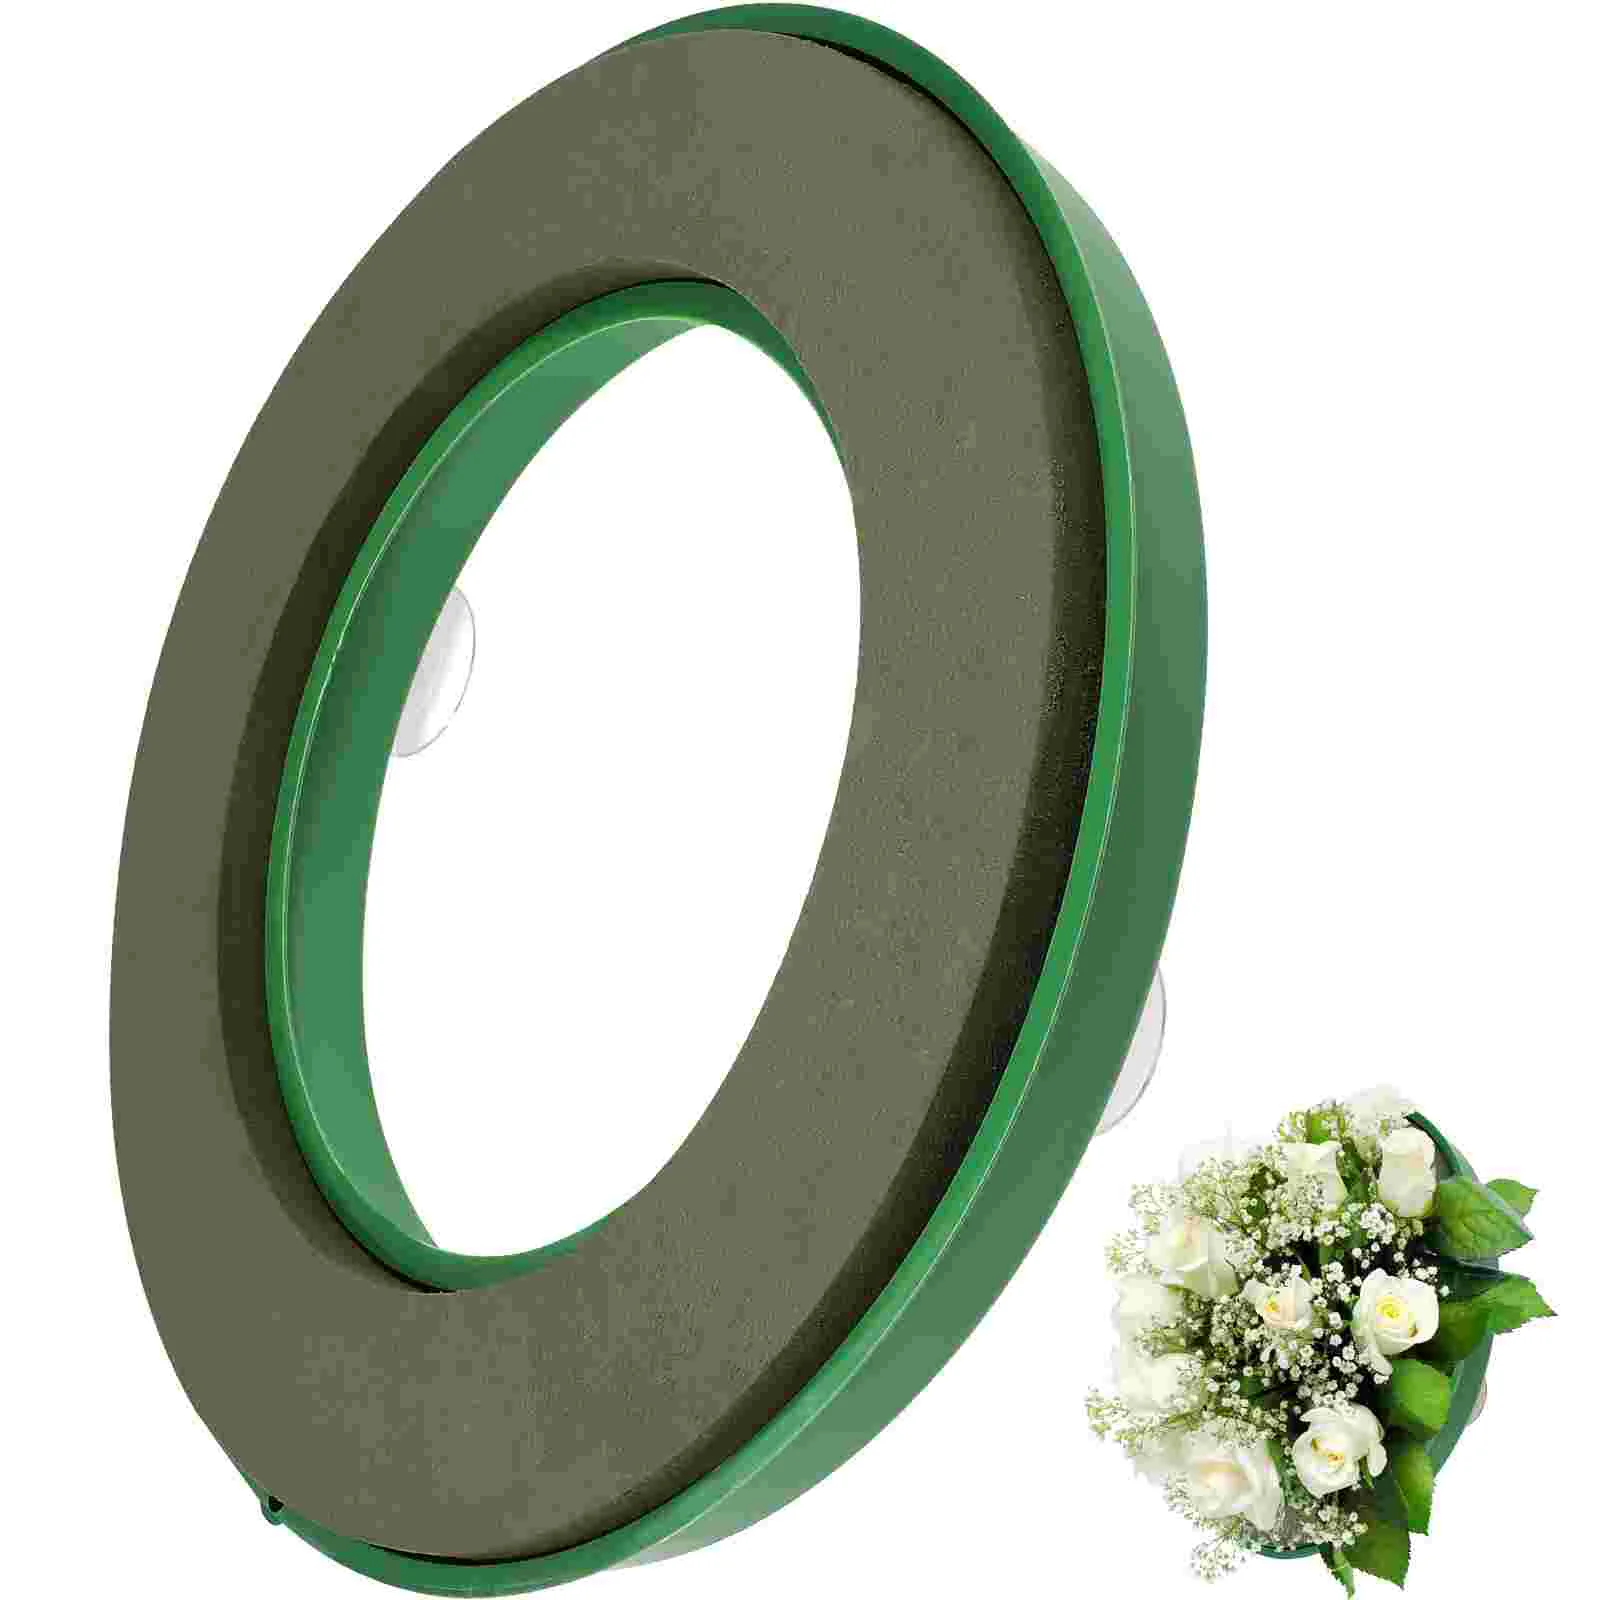 

Plastic Wreath Ring Craft Foam Mud Block Rings Floral Flower Making Supplies Projects Holder